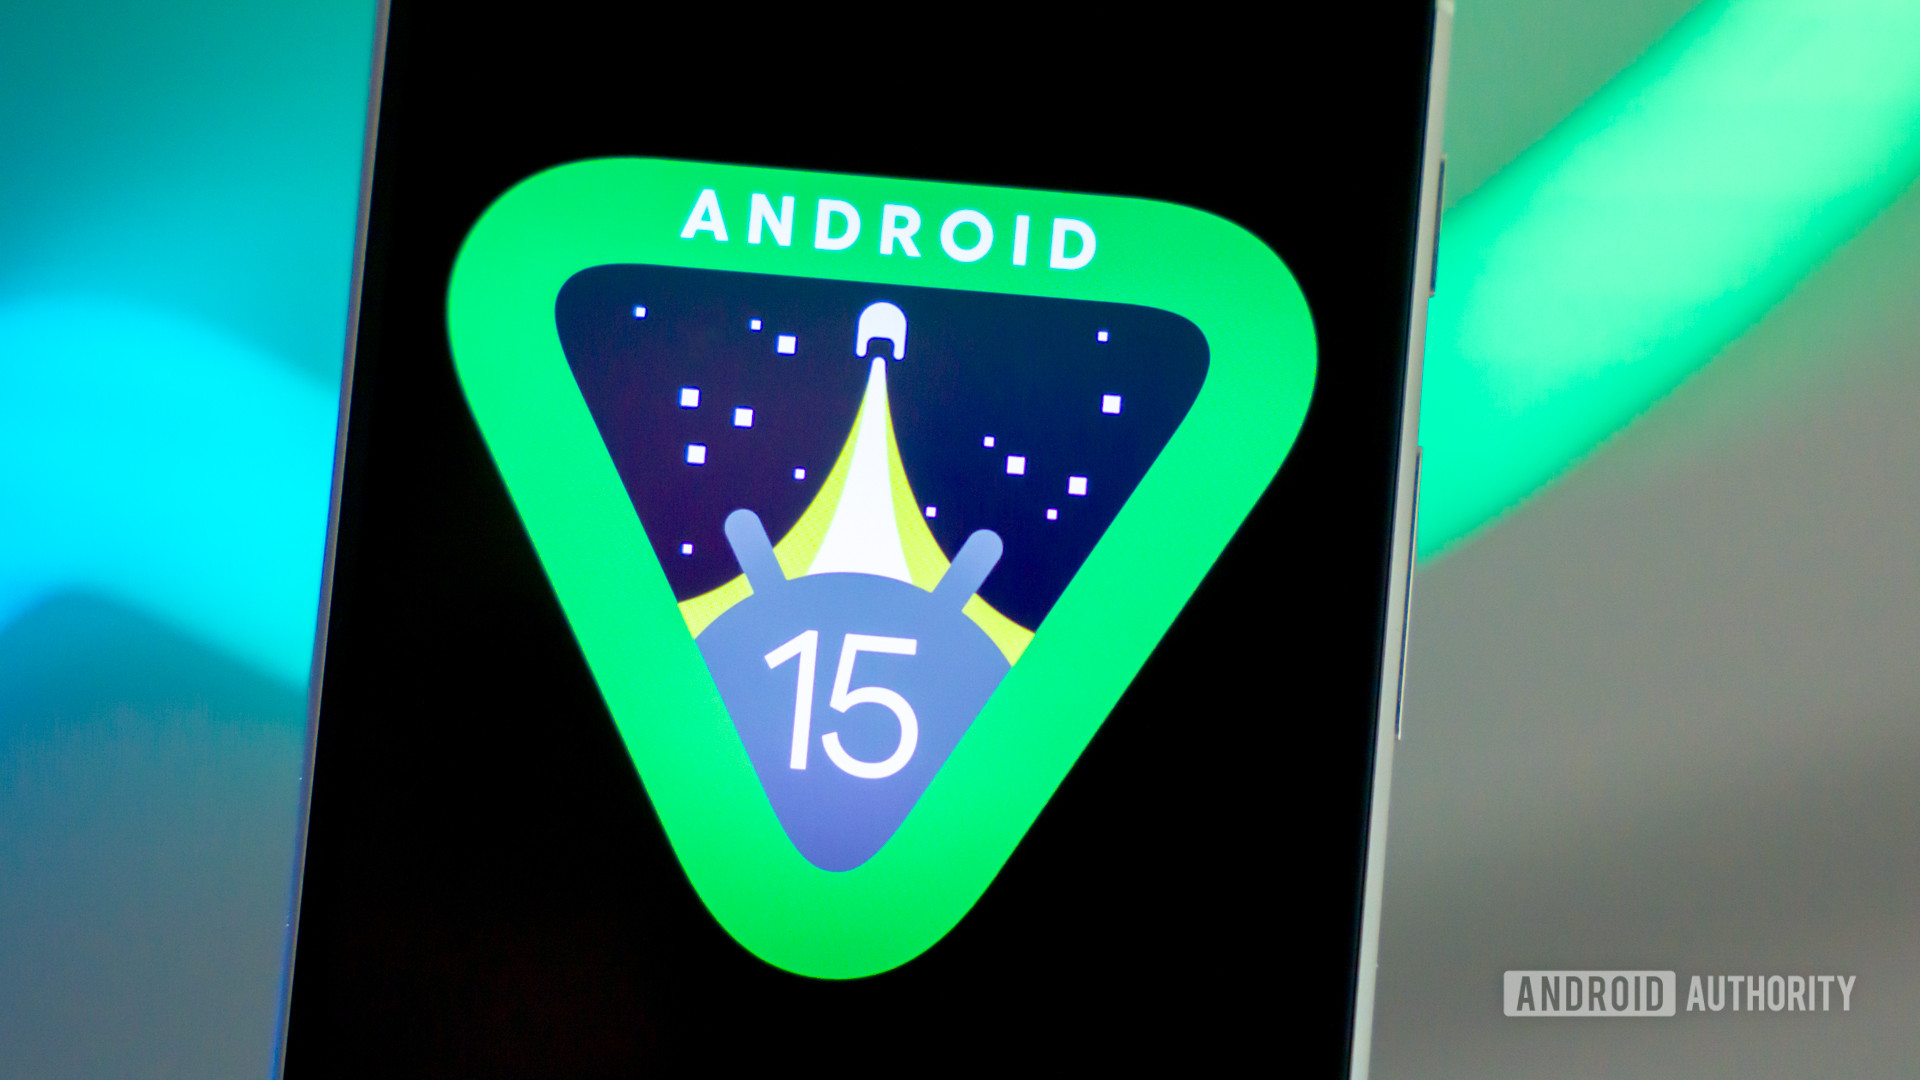 Android 15 logo on smartphone with light strip in background stock photo (13)